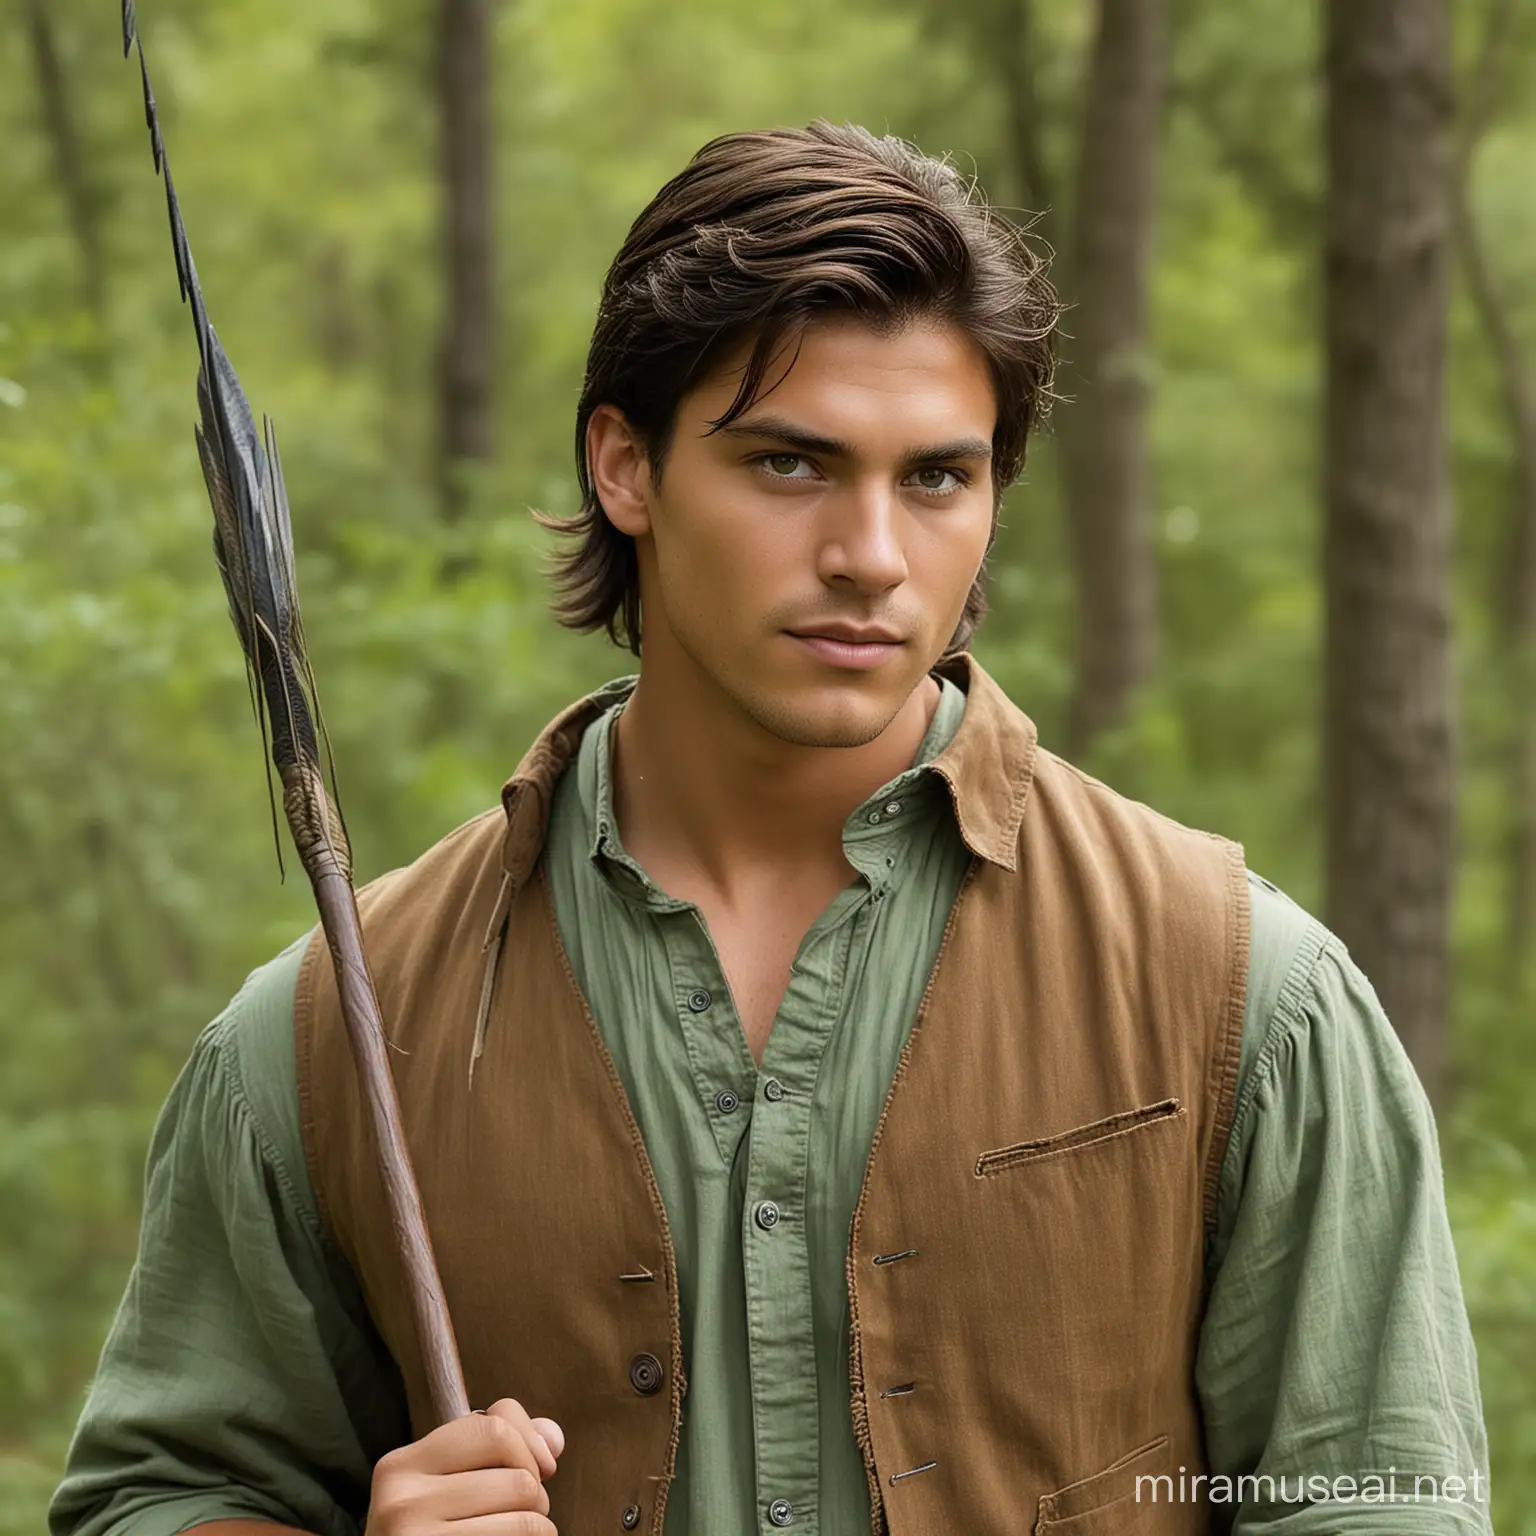 Young man with dark brown hair and green eyes. 25 years old. Forest background. Has a spear and a loose green linen shirt with brown vest from the 1700s, holding a spear. Tanned skin from being outdoors. Native American like. 